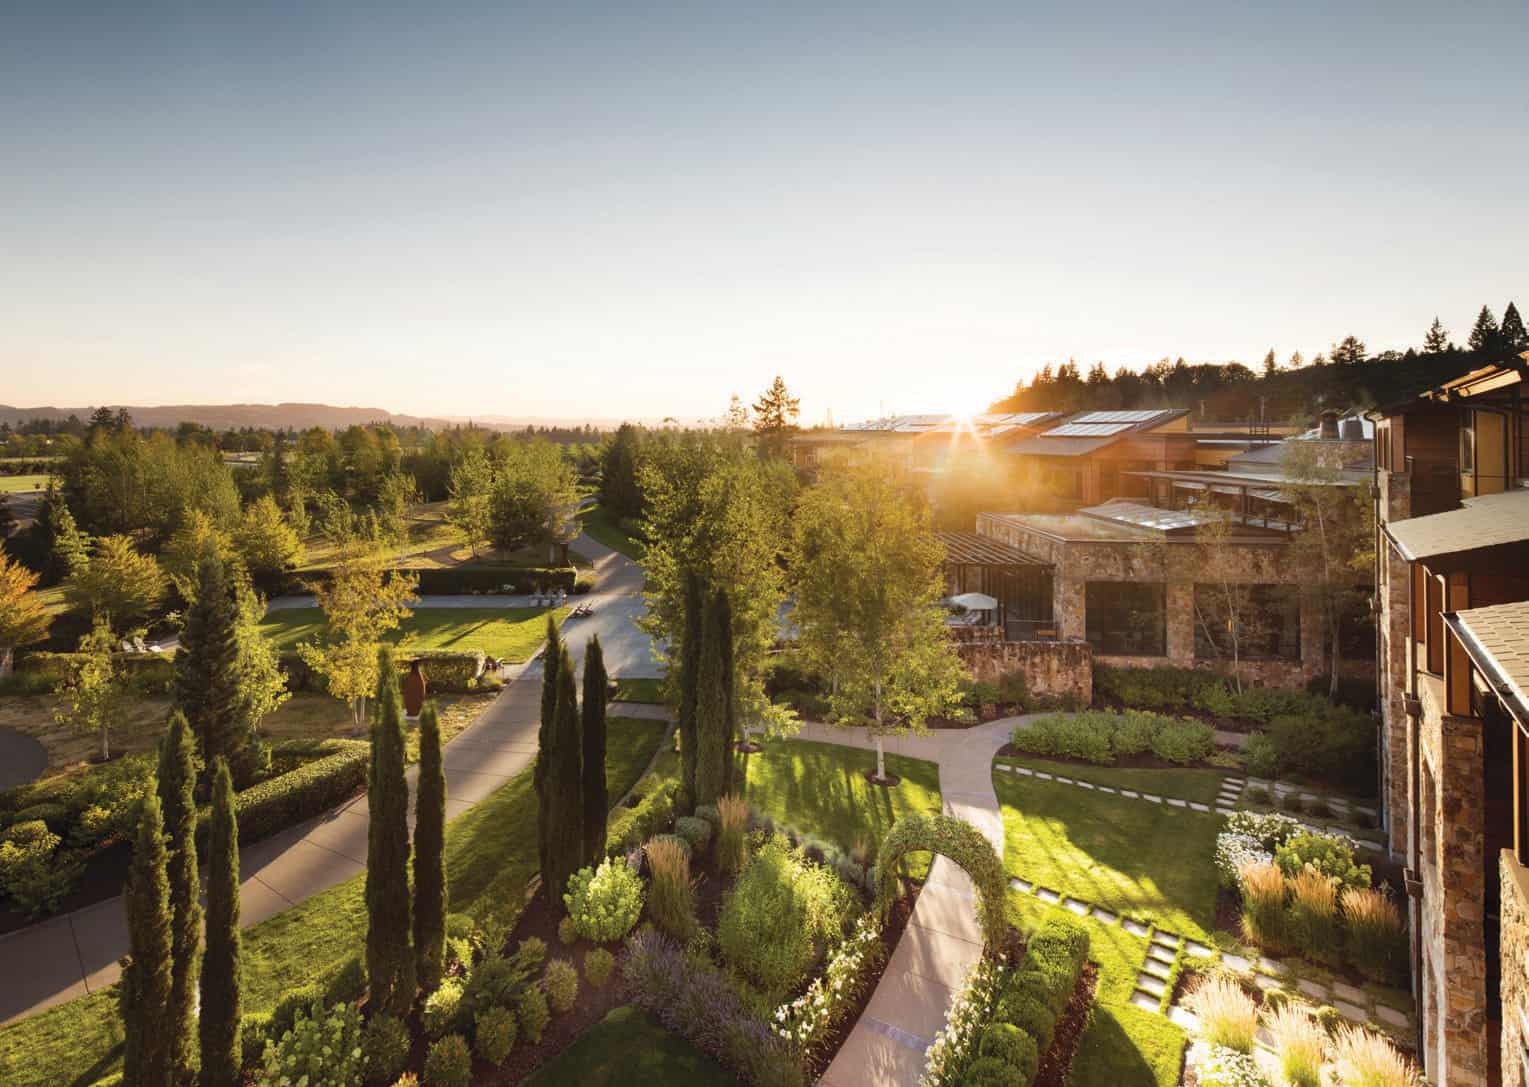 The Allison Inn lies at the intersection of luxury and beauty in Oregon’s wine country.